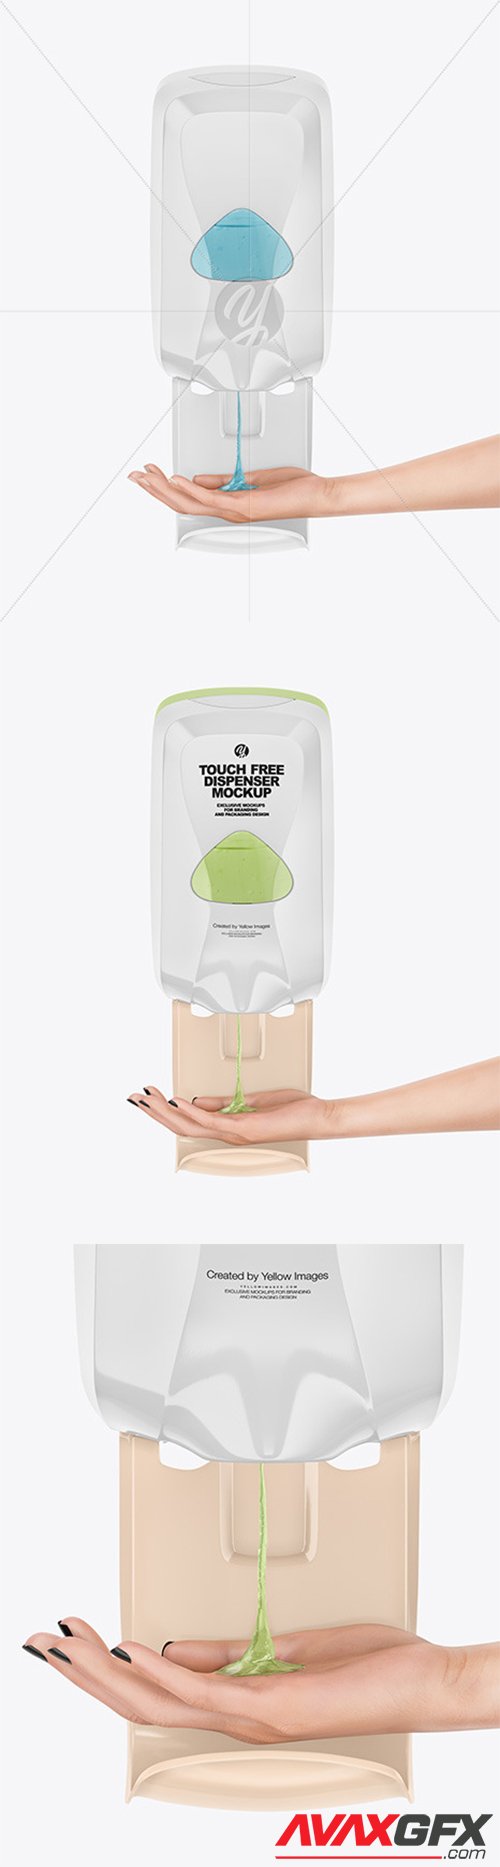 Download Sanitizer Dispenser With Hand Mockup 59608 Avaxgfx All Downloads That You Need In One Place Graphic From Nitroflare Rapidgator Yellowimages Mockups